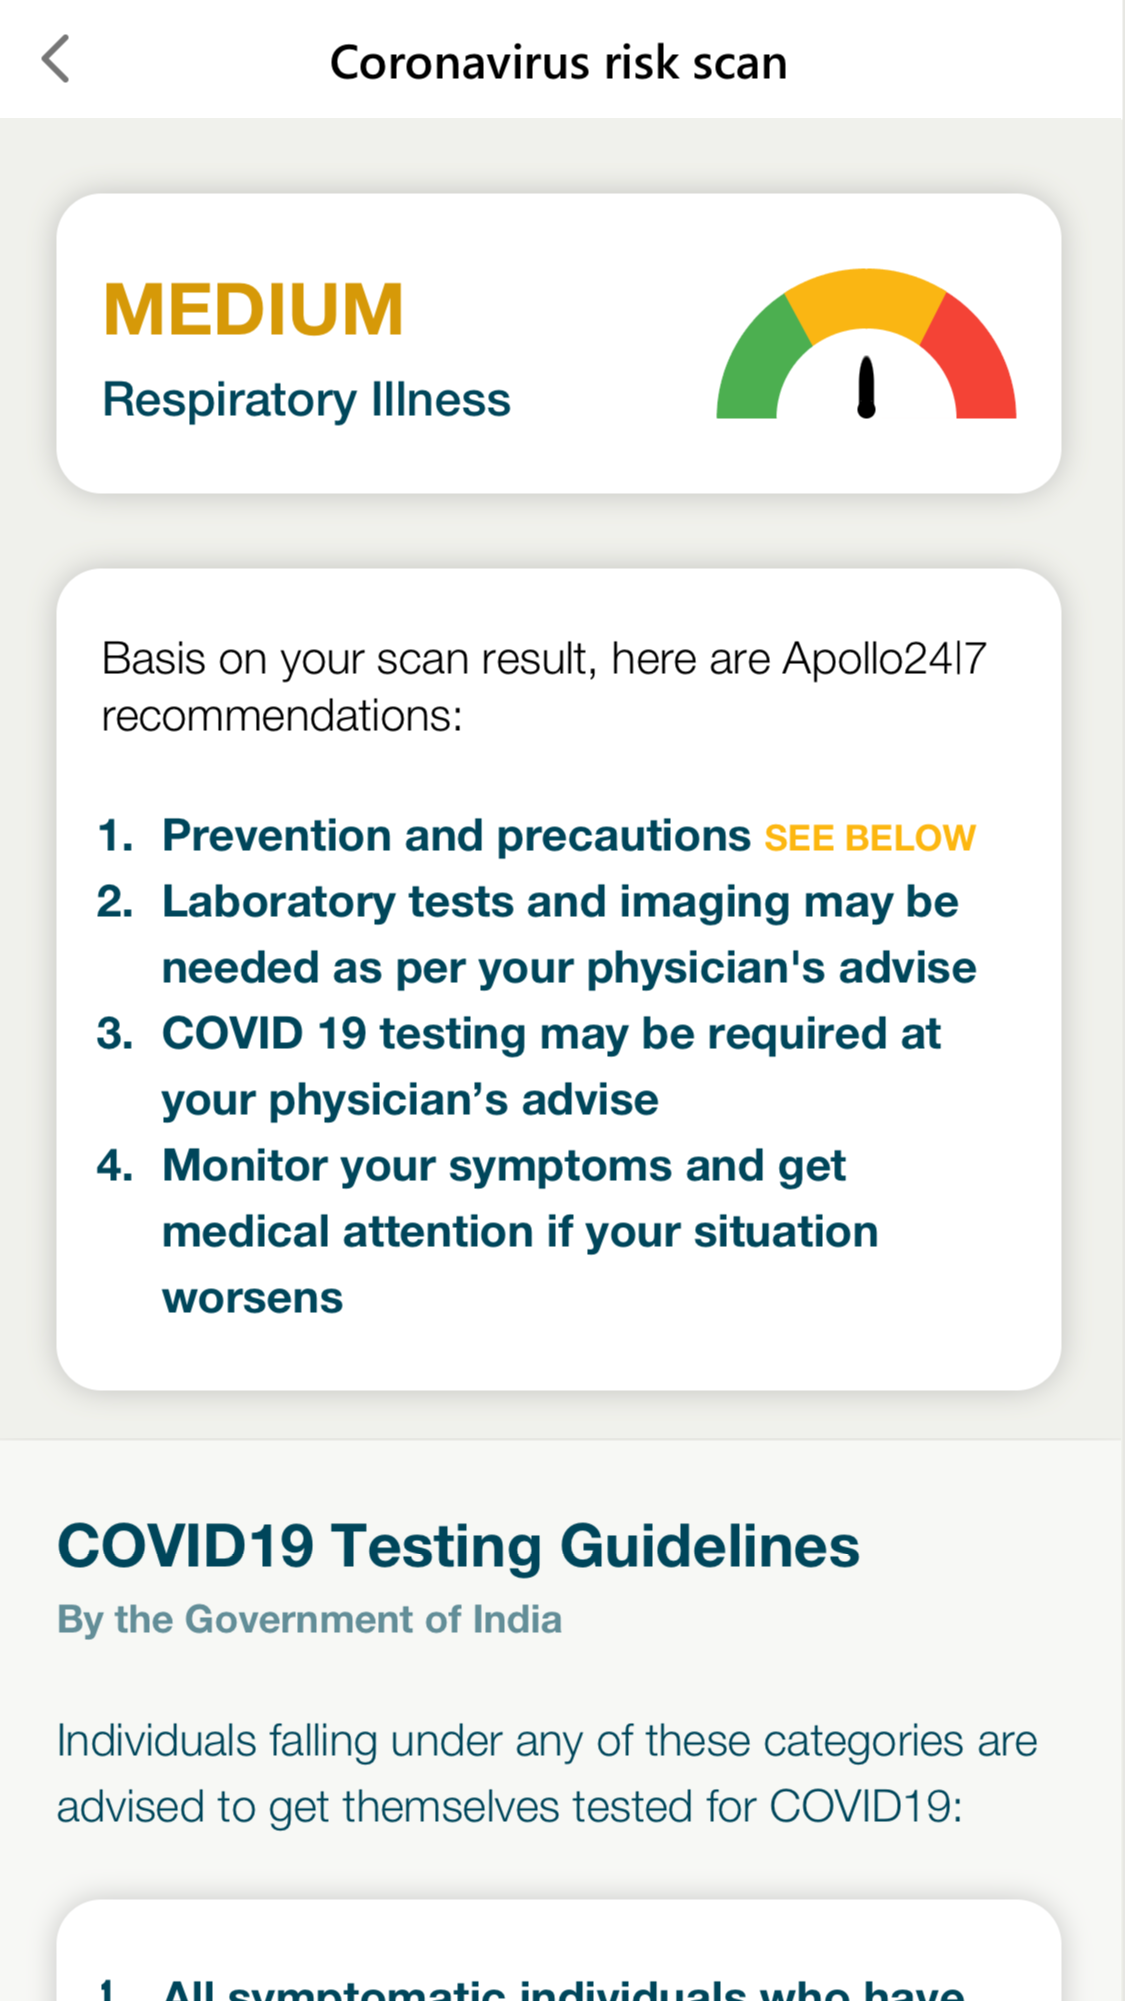 The AI-powered Apollo Hospitals bot enables users to conduct a self-assessment of potential symptoms and risk level for COVID-19 through Bing’s COVID-19 Tracker